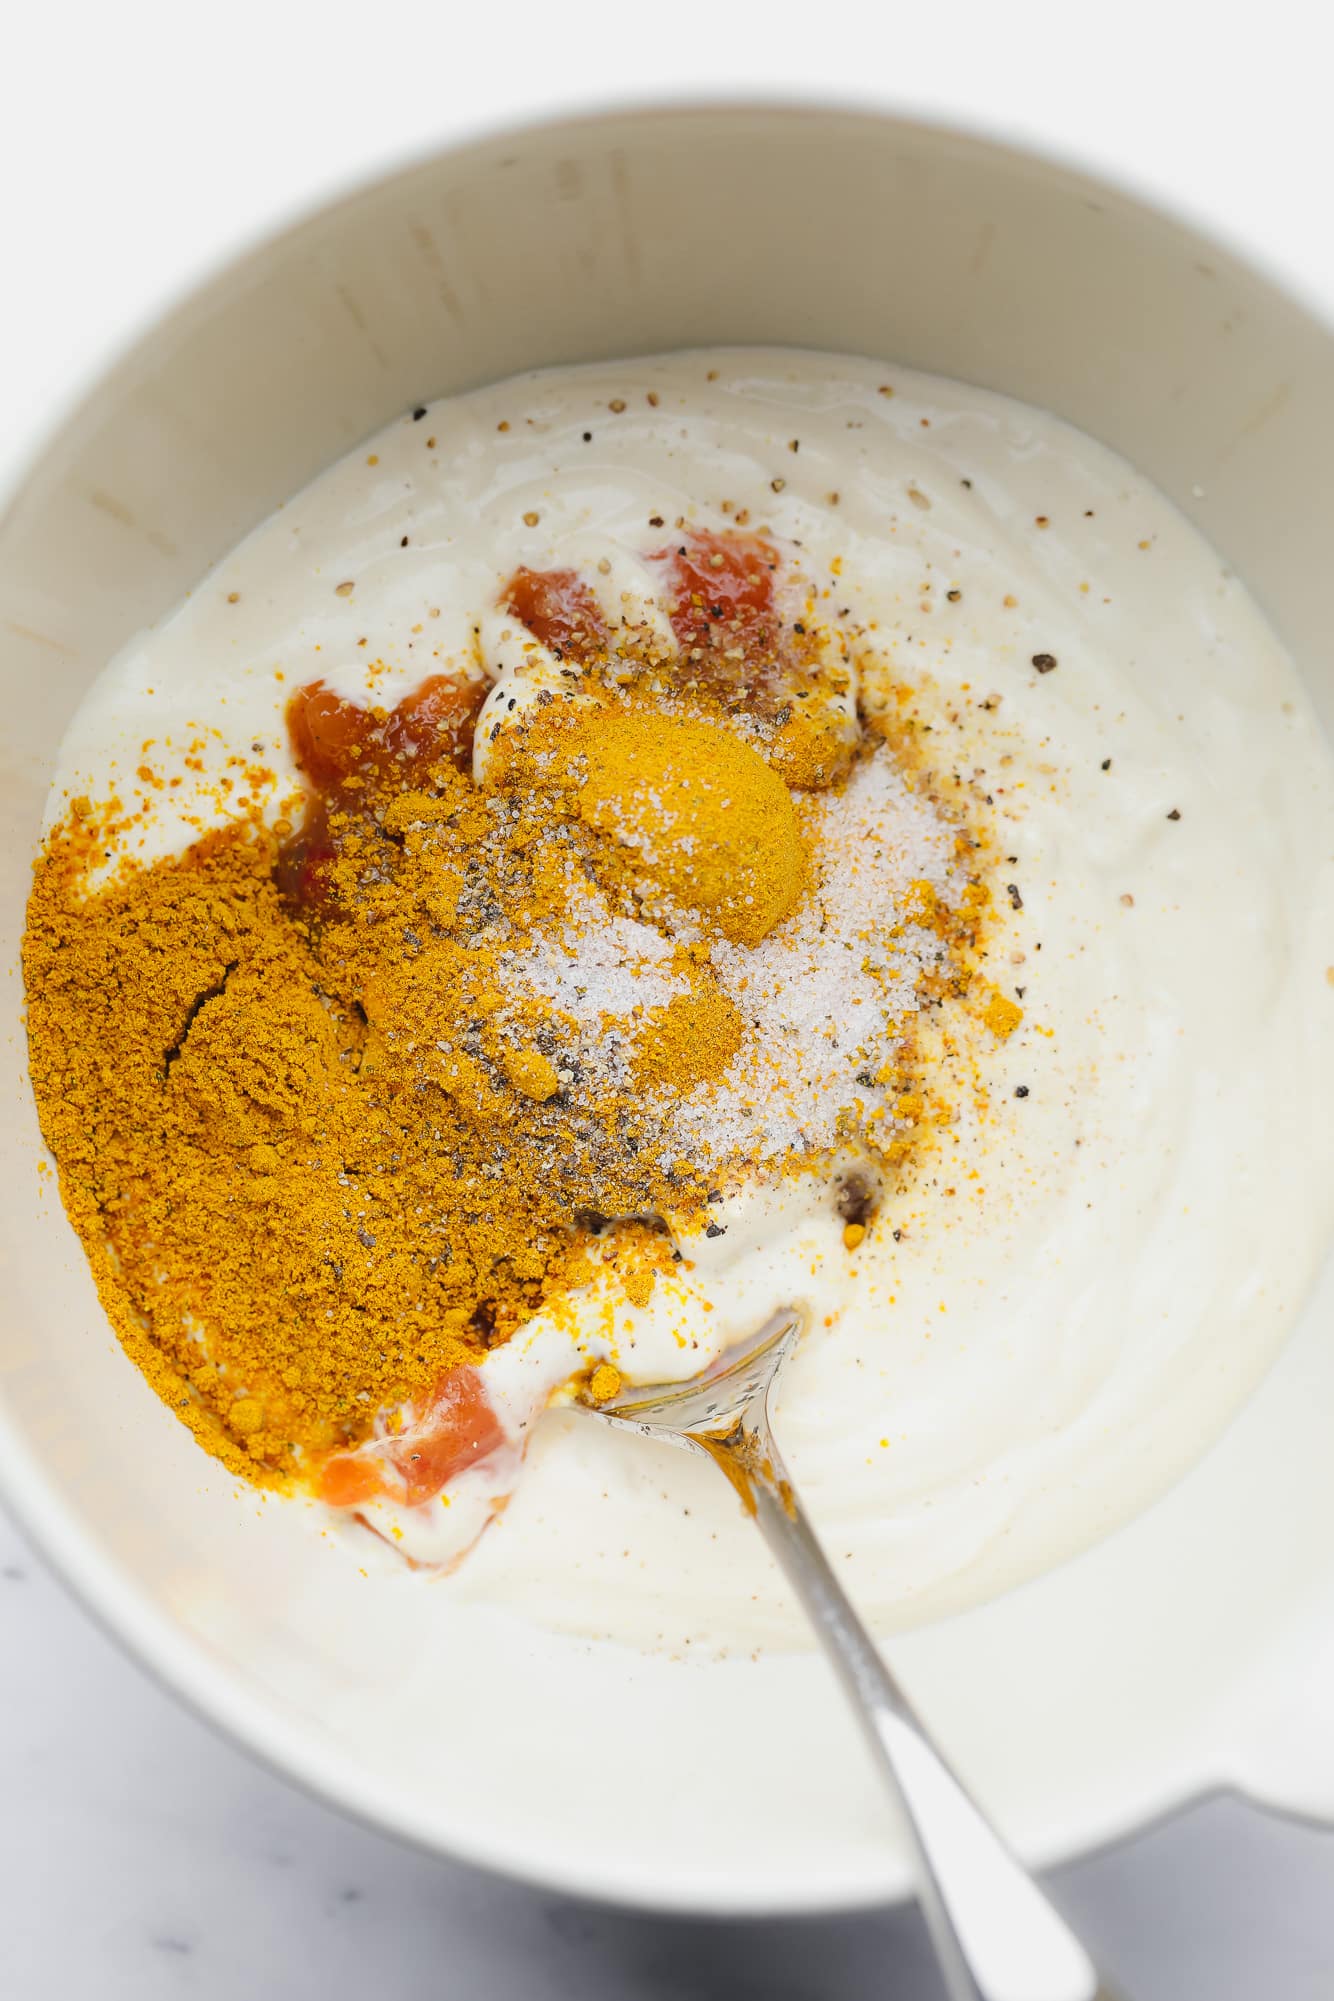 using a spoon to stir yellow and red spices into vegan mayonnaise in a white bowl.